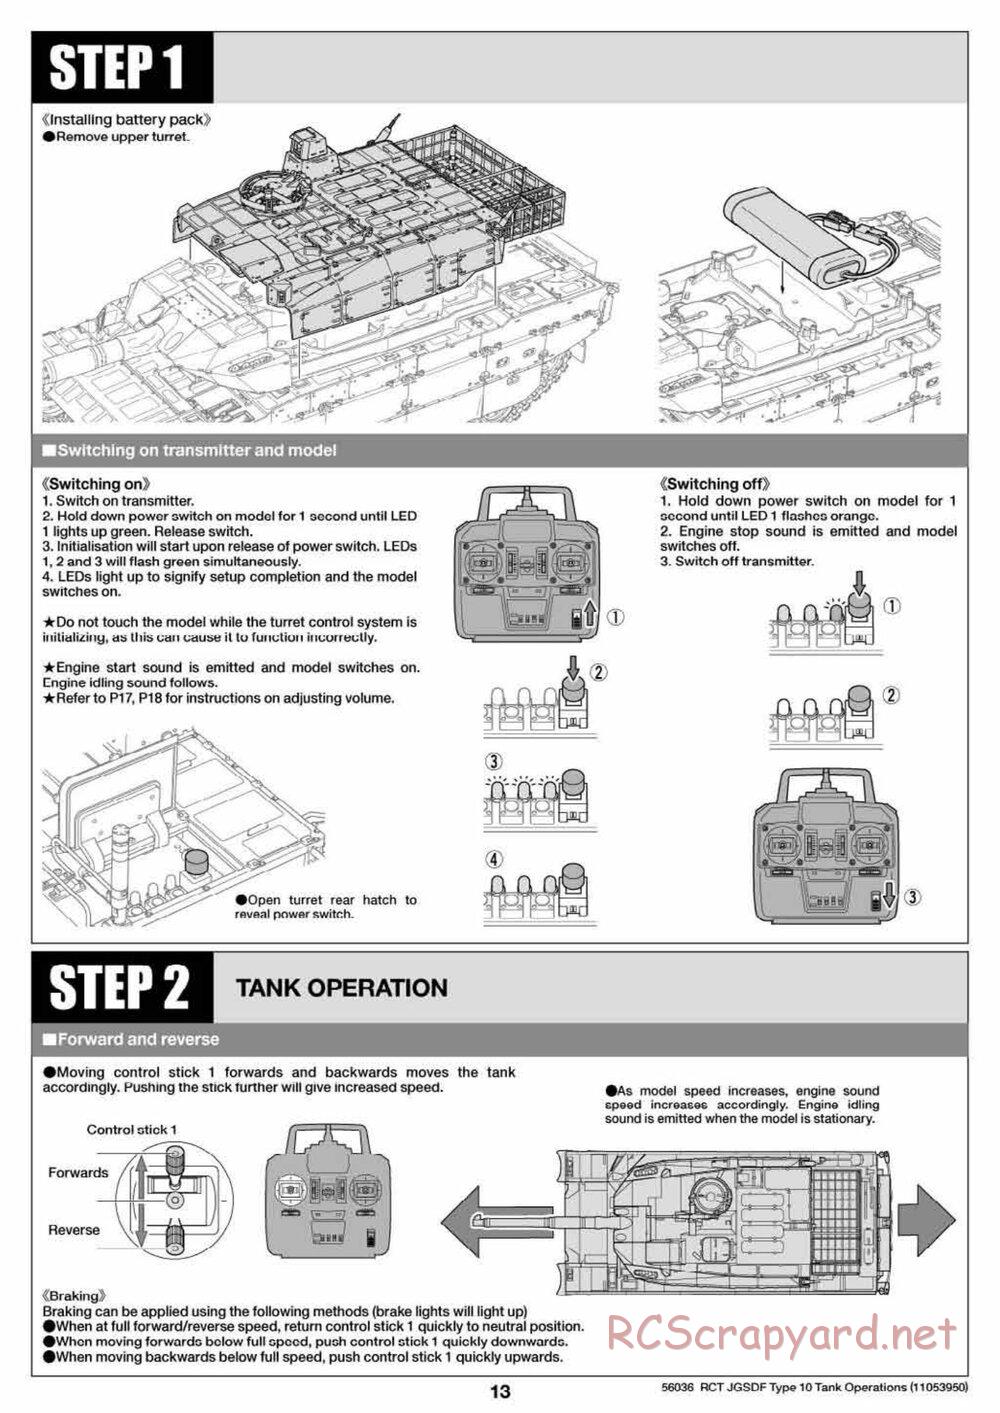 Tamiya - JGSDF Type 10 Tank - 1/16 Scale Chassis - Operation Manual - Page 3